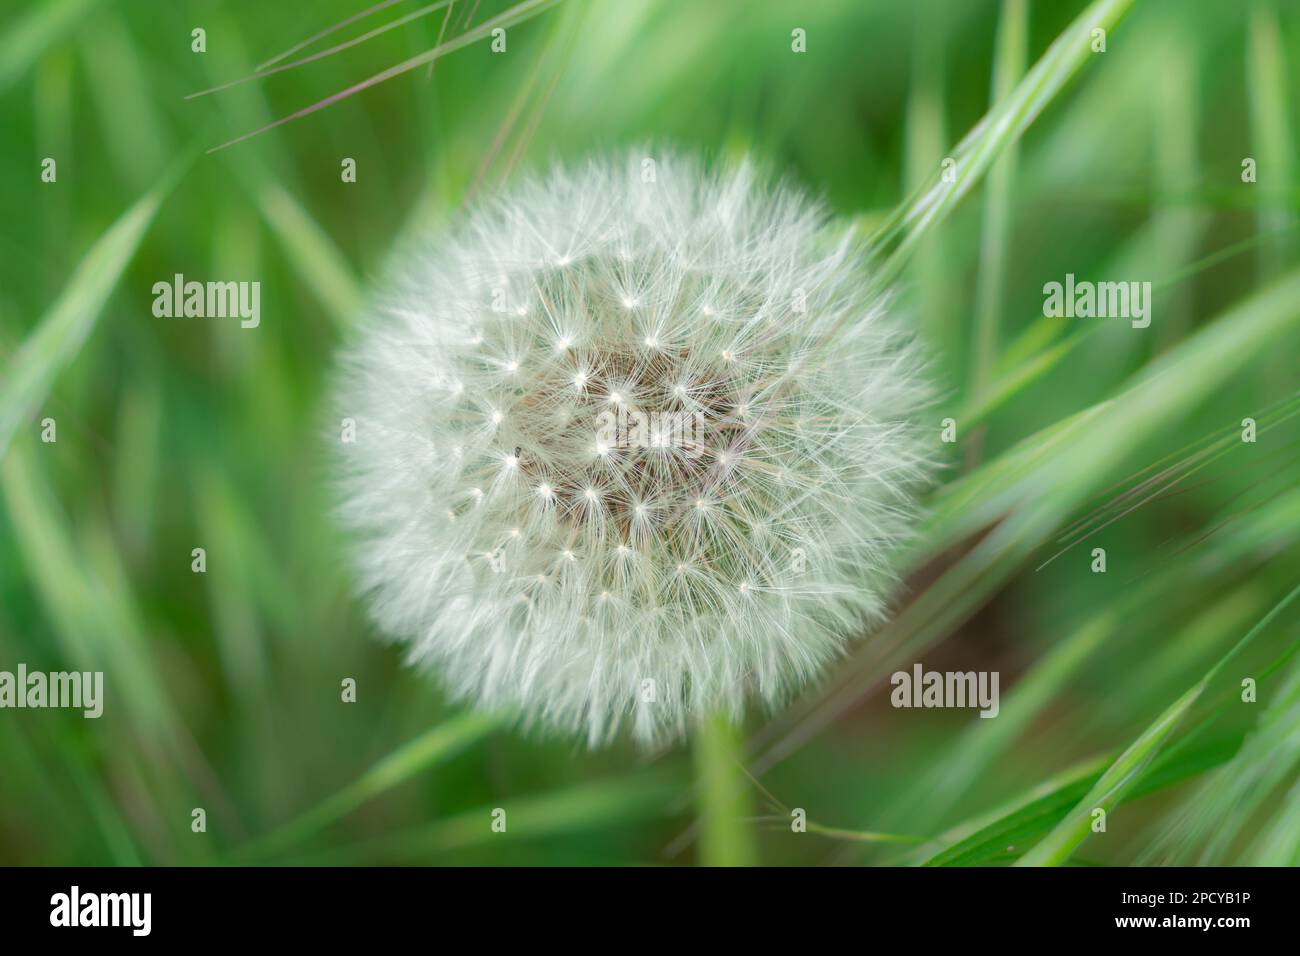 a close up of a dandelion(Taraxacum erythrospermum) flower with its white fluff of seeds   on a blurred background Stock Photo